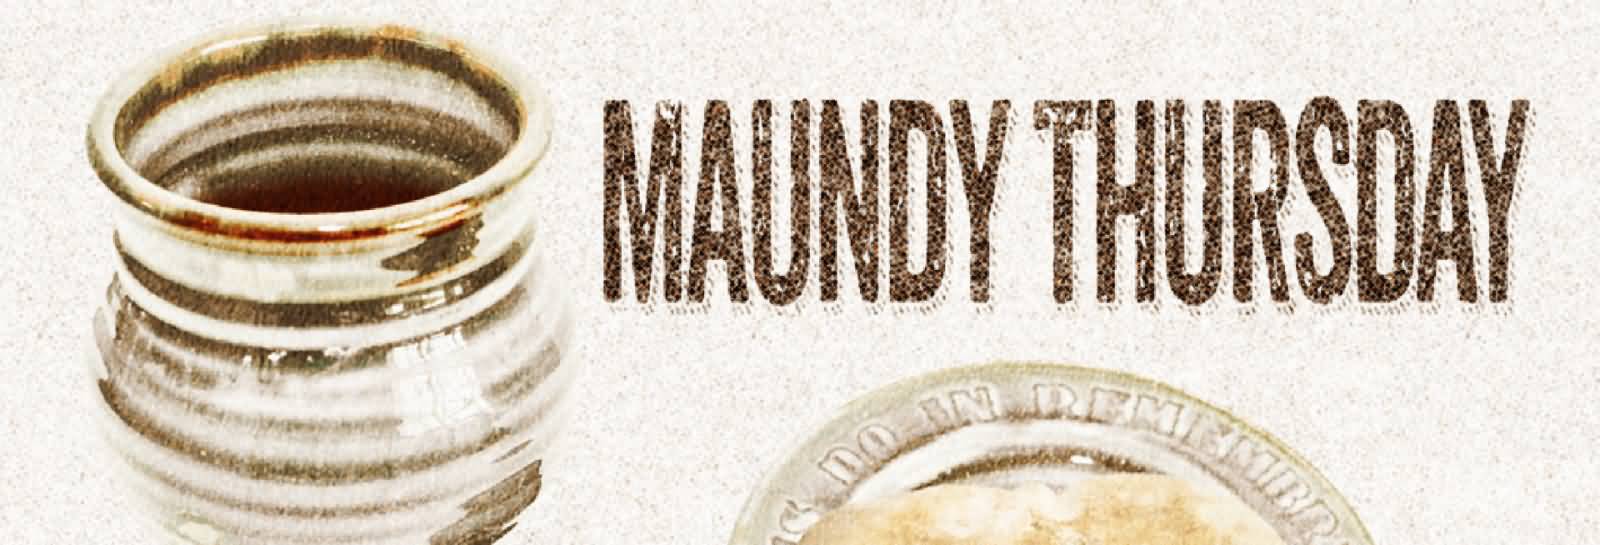 Holy Maundy Thursday Wishes Facebook Cover Photo